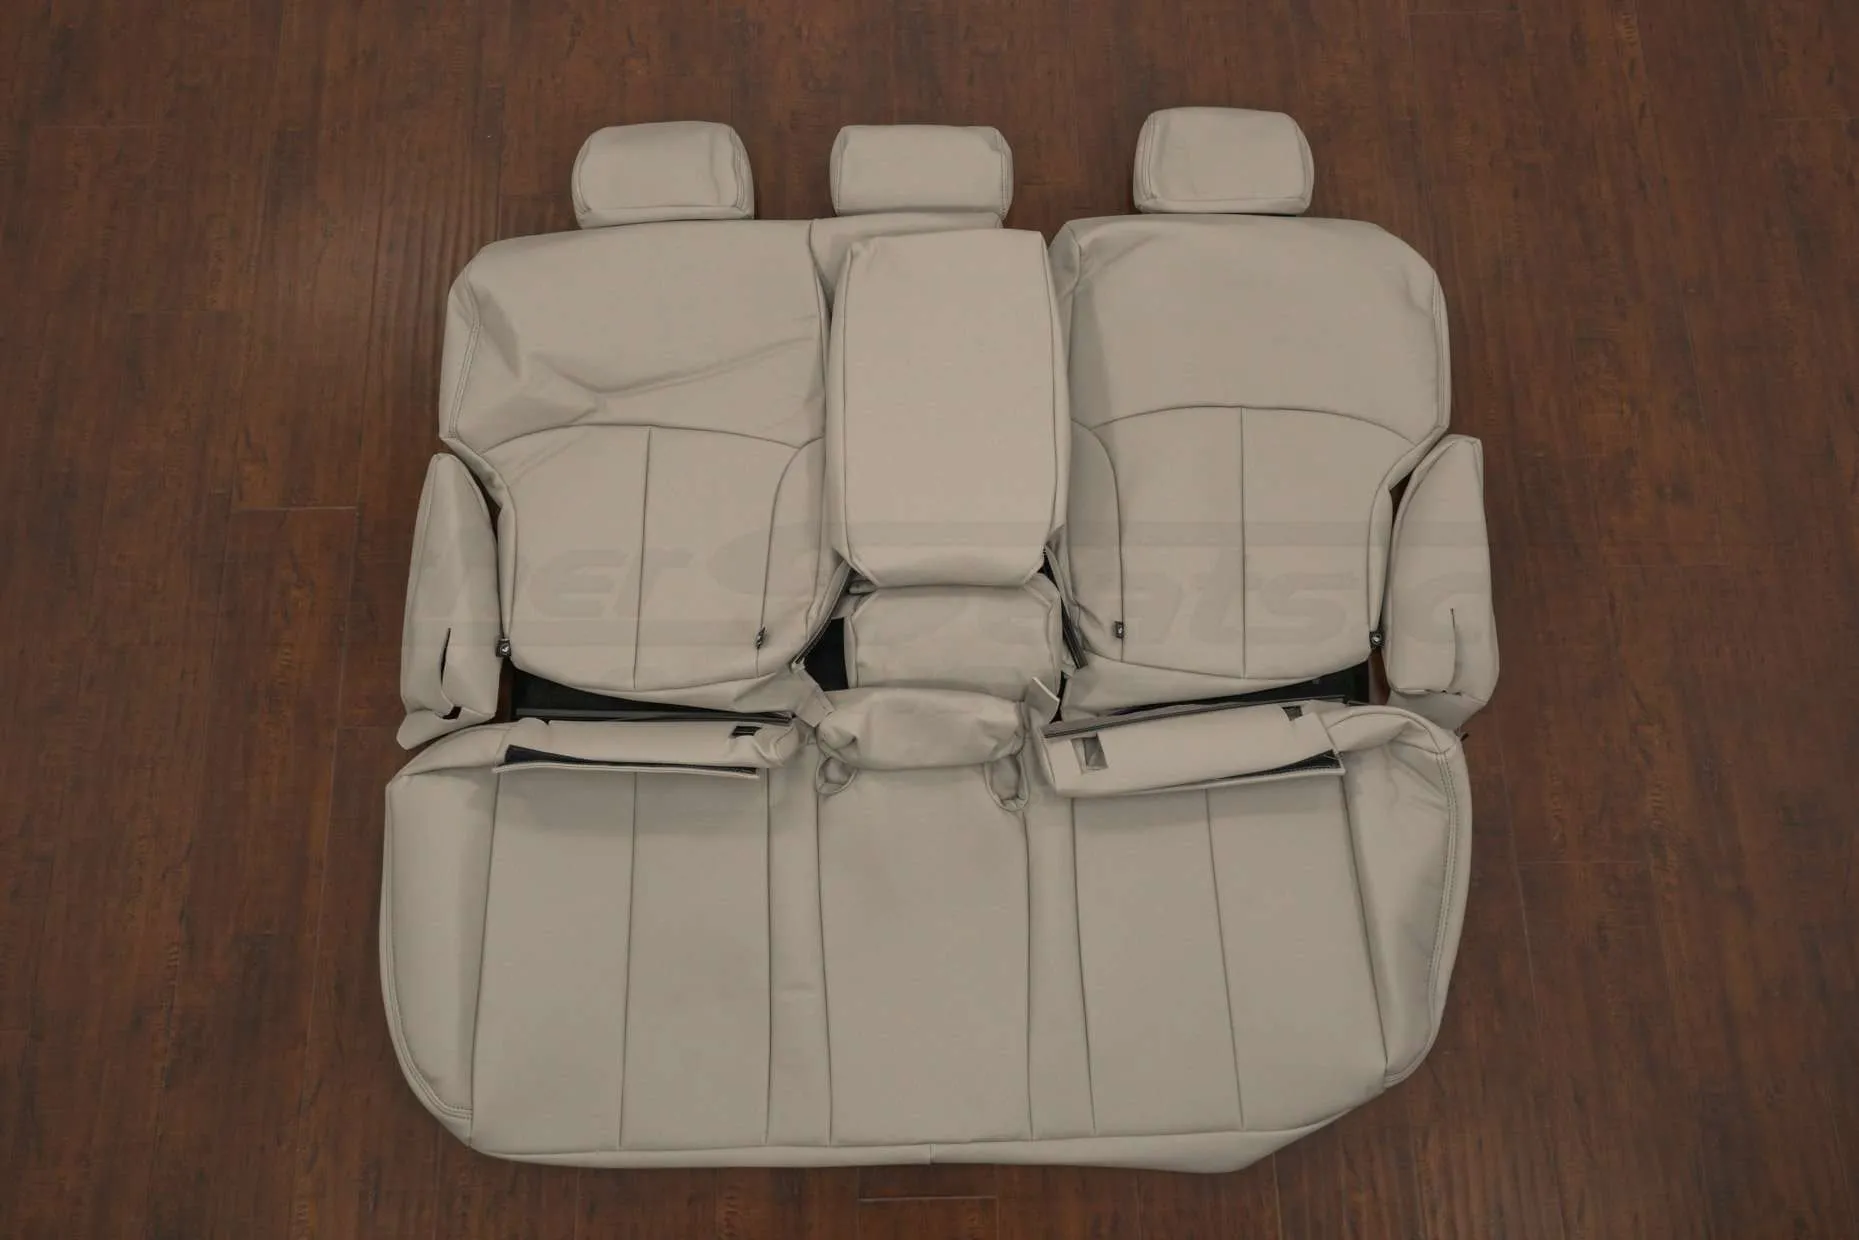 2010-2012 Subaru Outback 2.5 Leather Seat Kit - Rear seat upholstery w/ Armrest & Bolsters